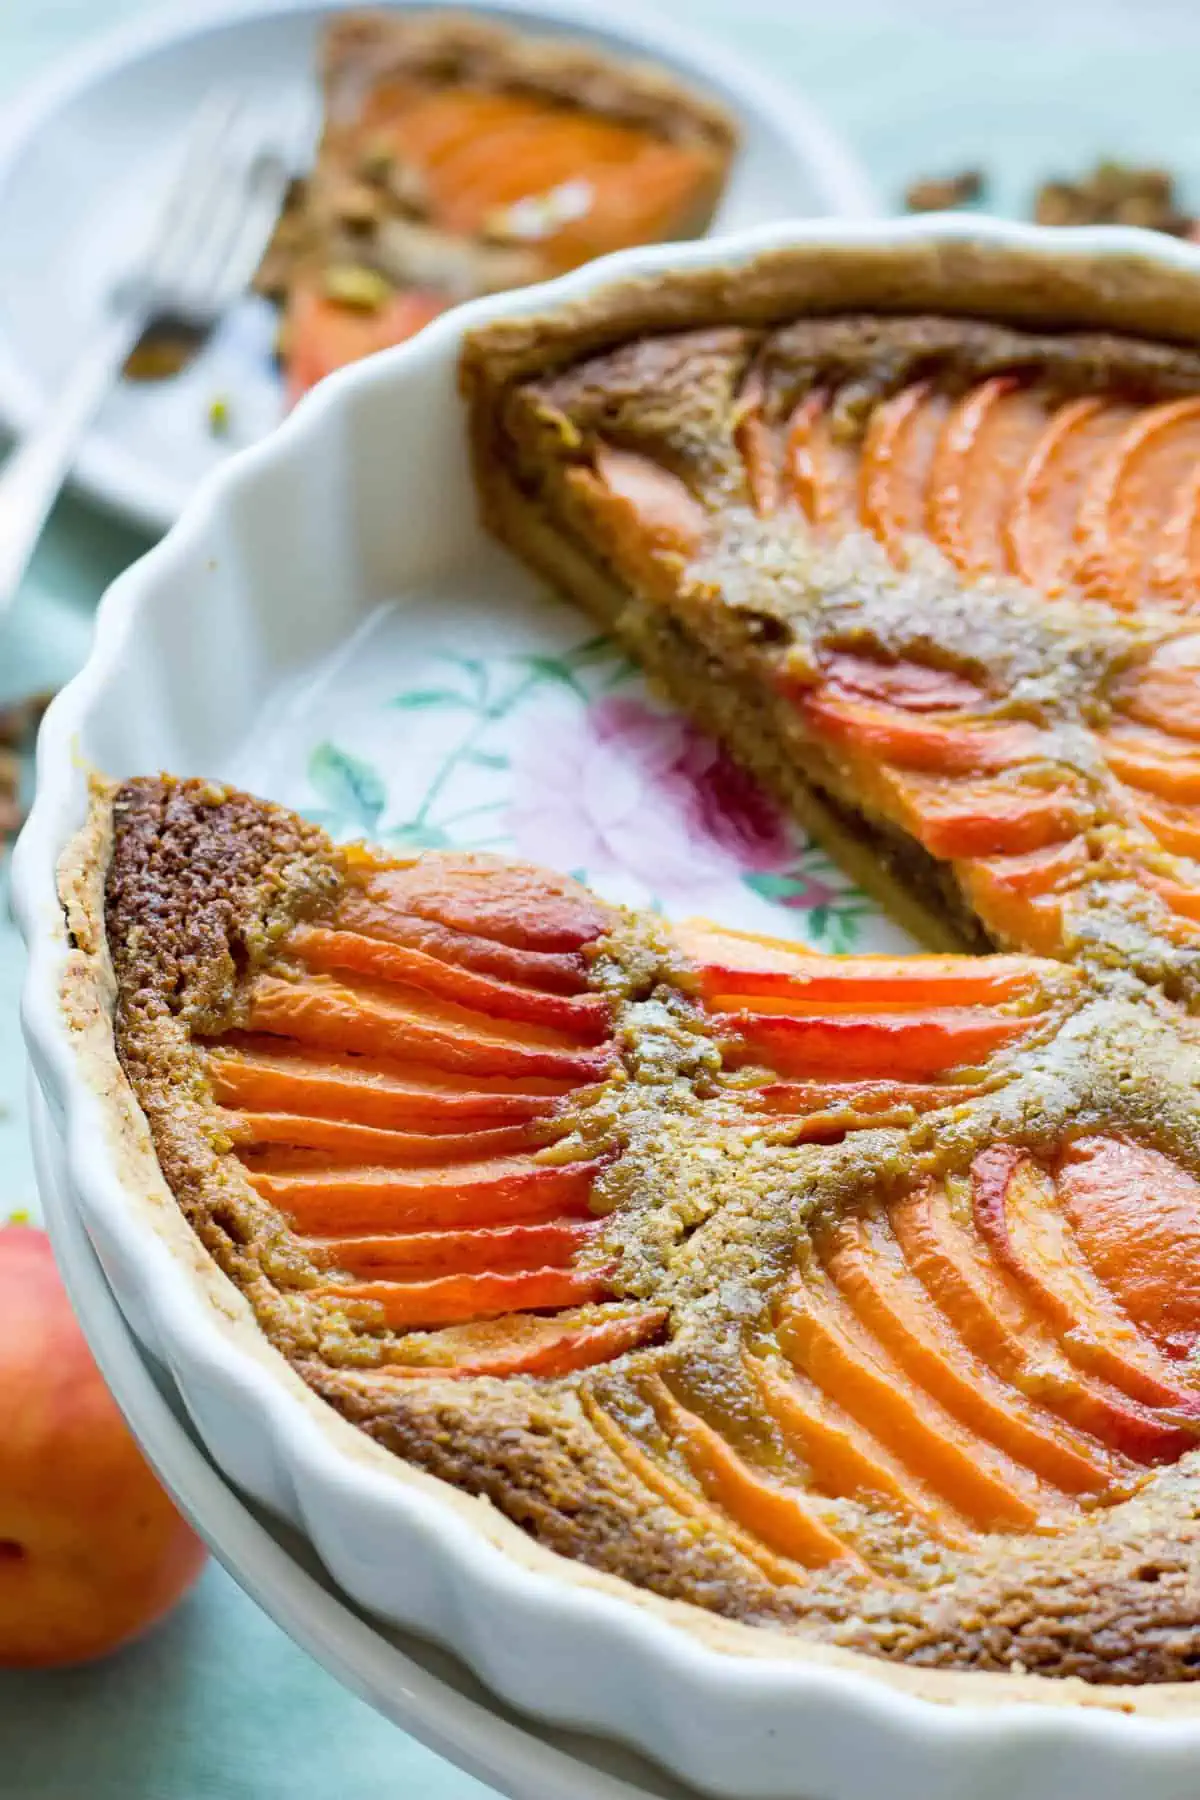 An apricot pistachio tart in a round baking dish with a slice missing.